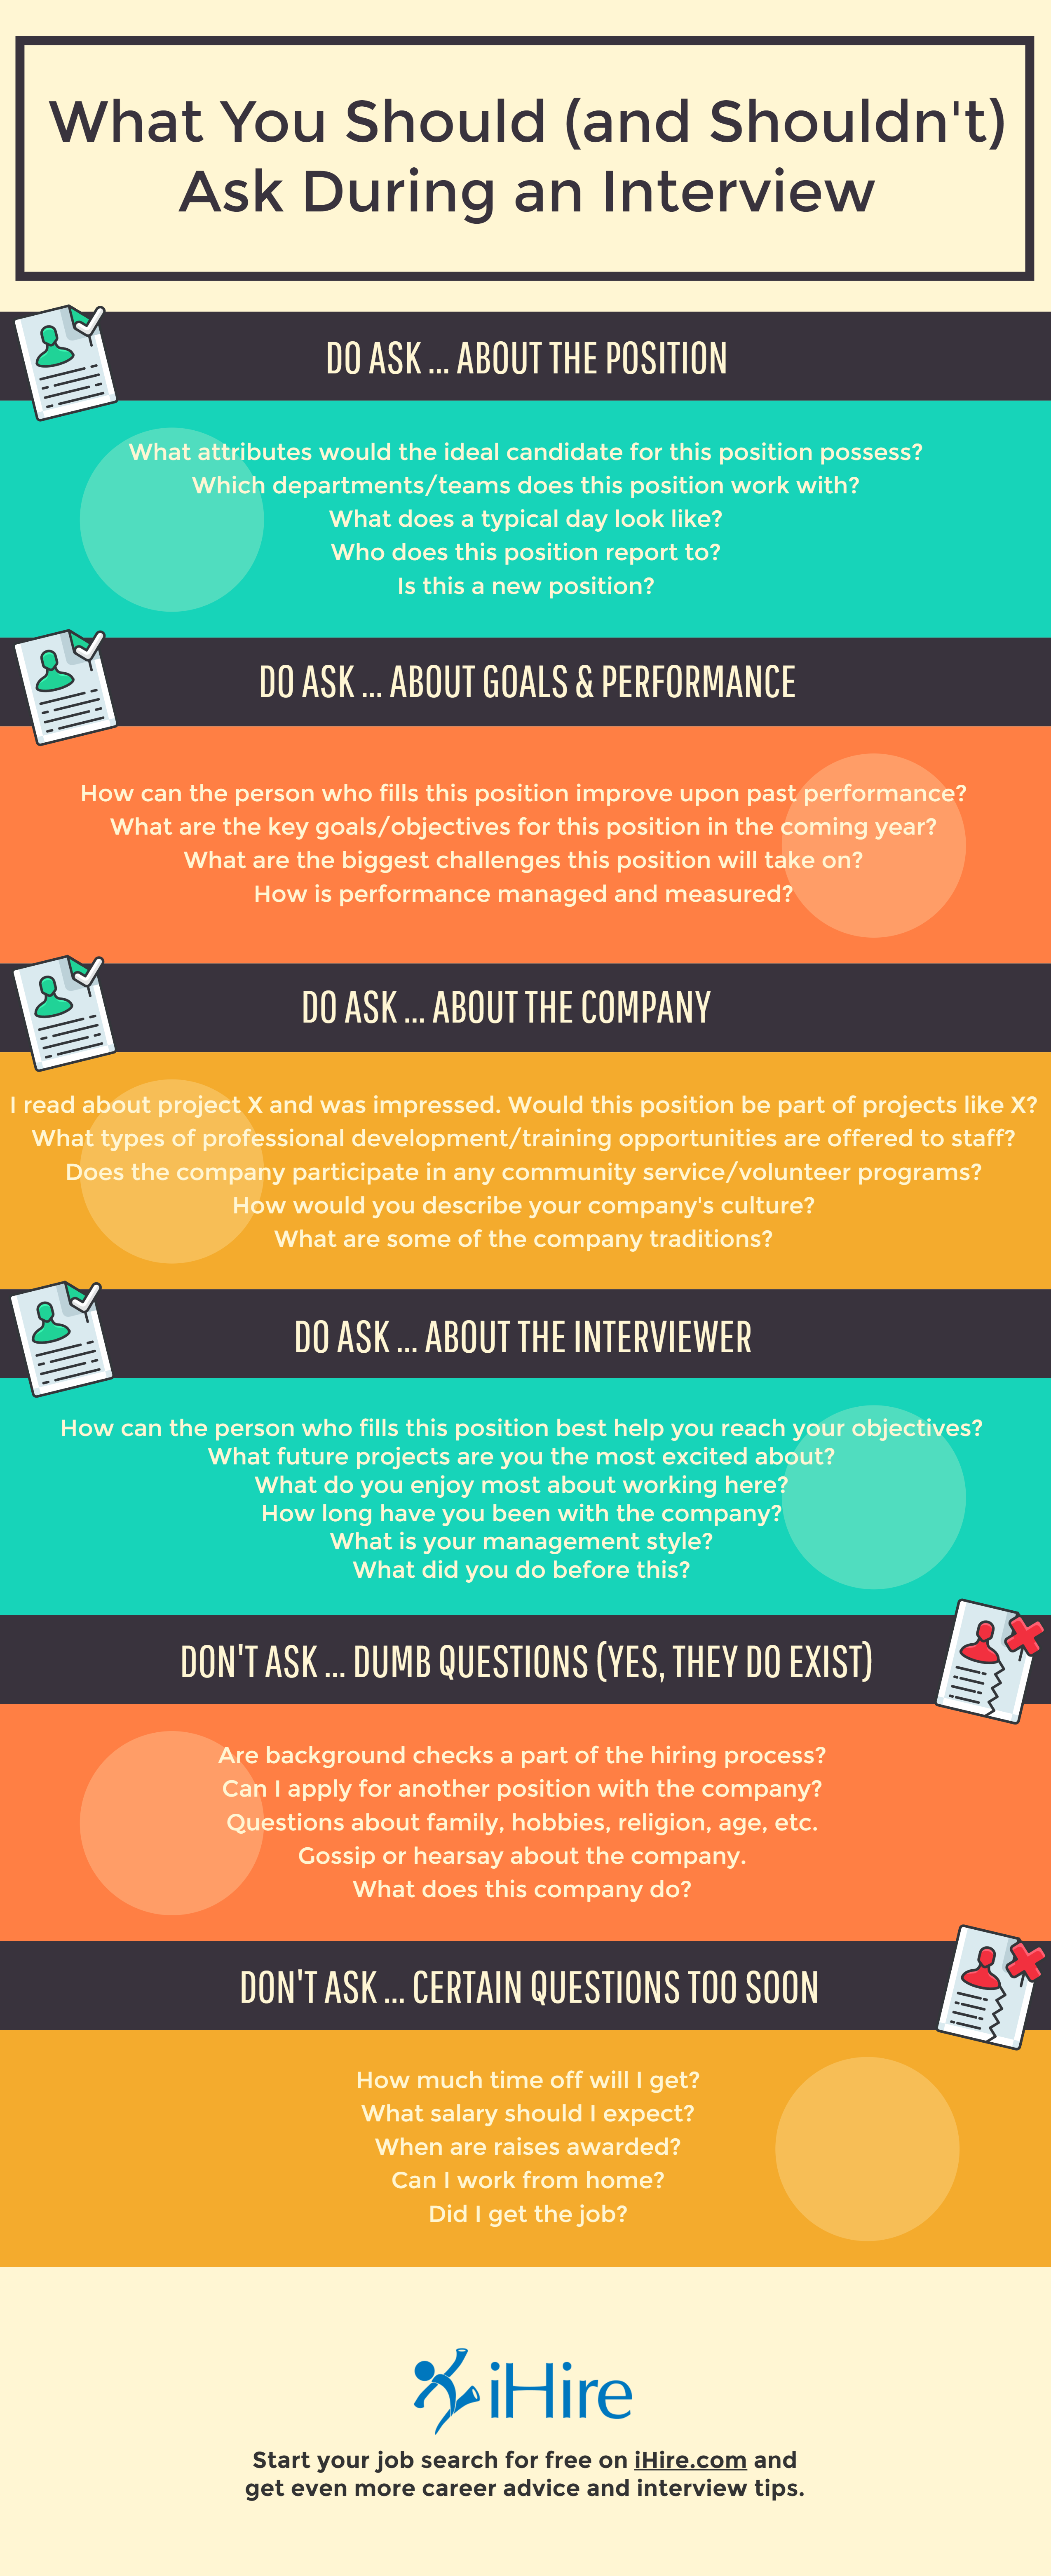 what you should and should not ask in an interview infographic